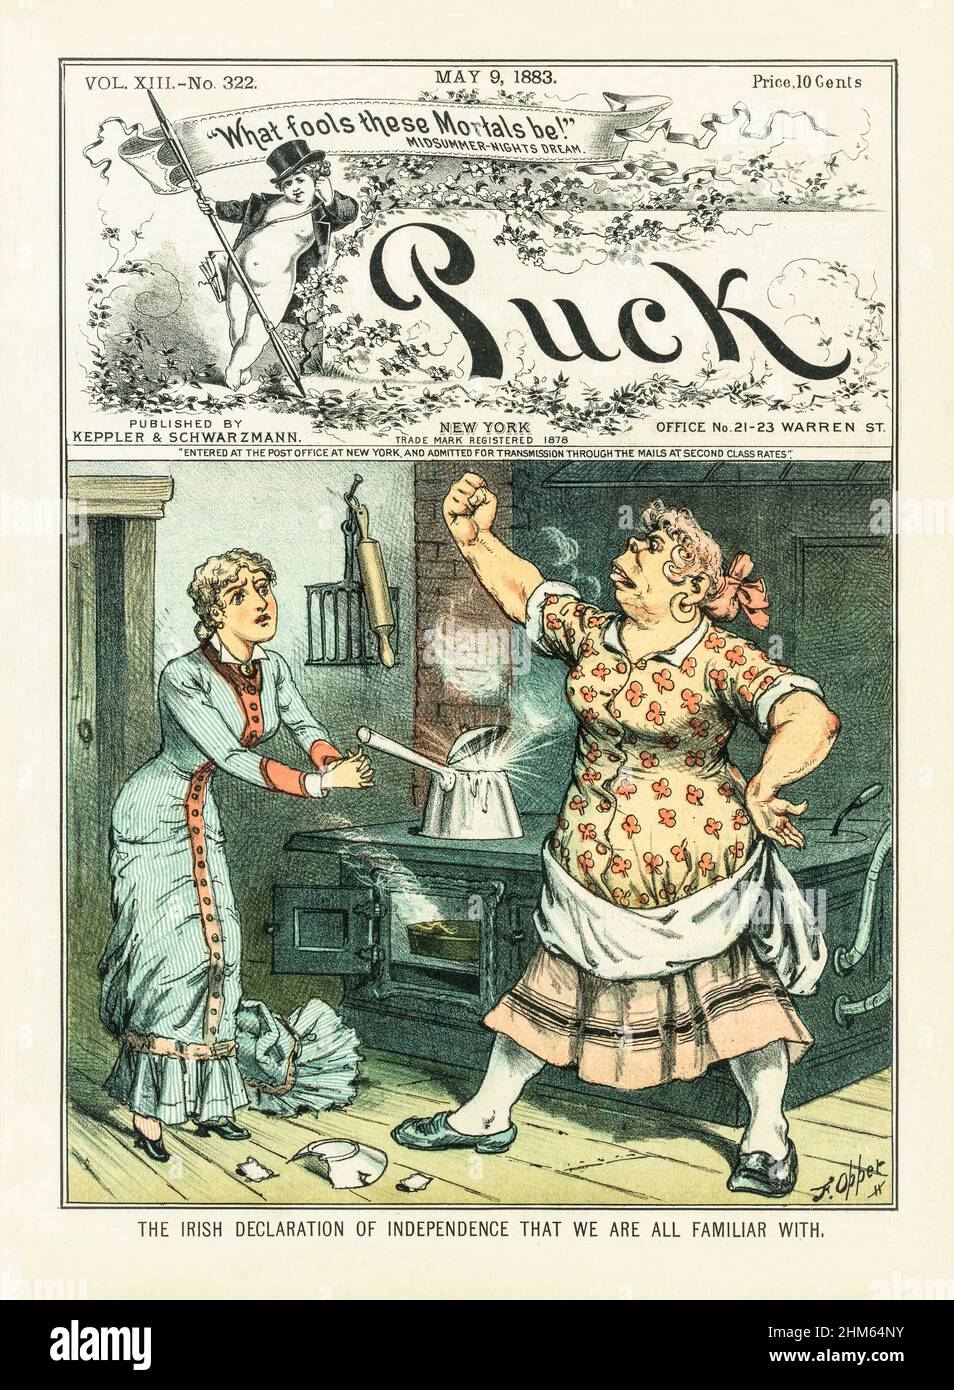 A late 19th century American Puck Magazine cover with a cartoon of a  scene in a kitchen with a petite woman imploring her muscular Irish cook to continue in her duties; the cook shakes her fist in defiance. Stock Photo